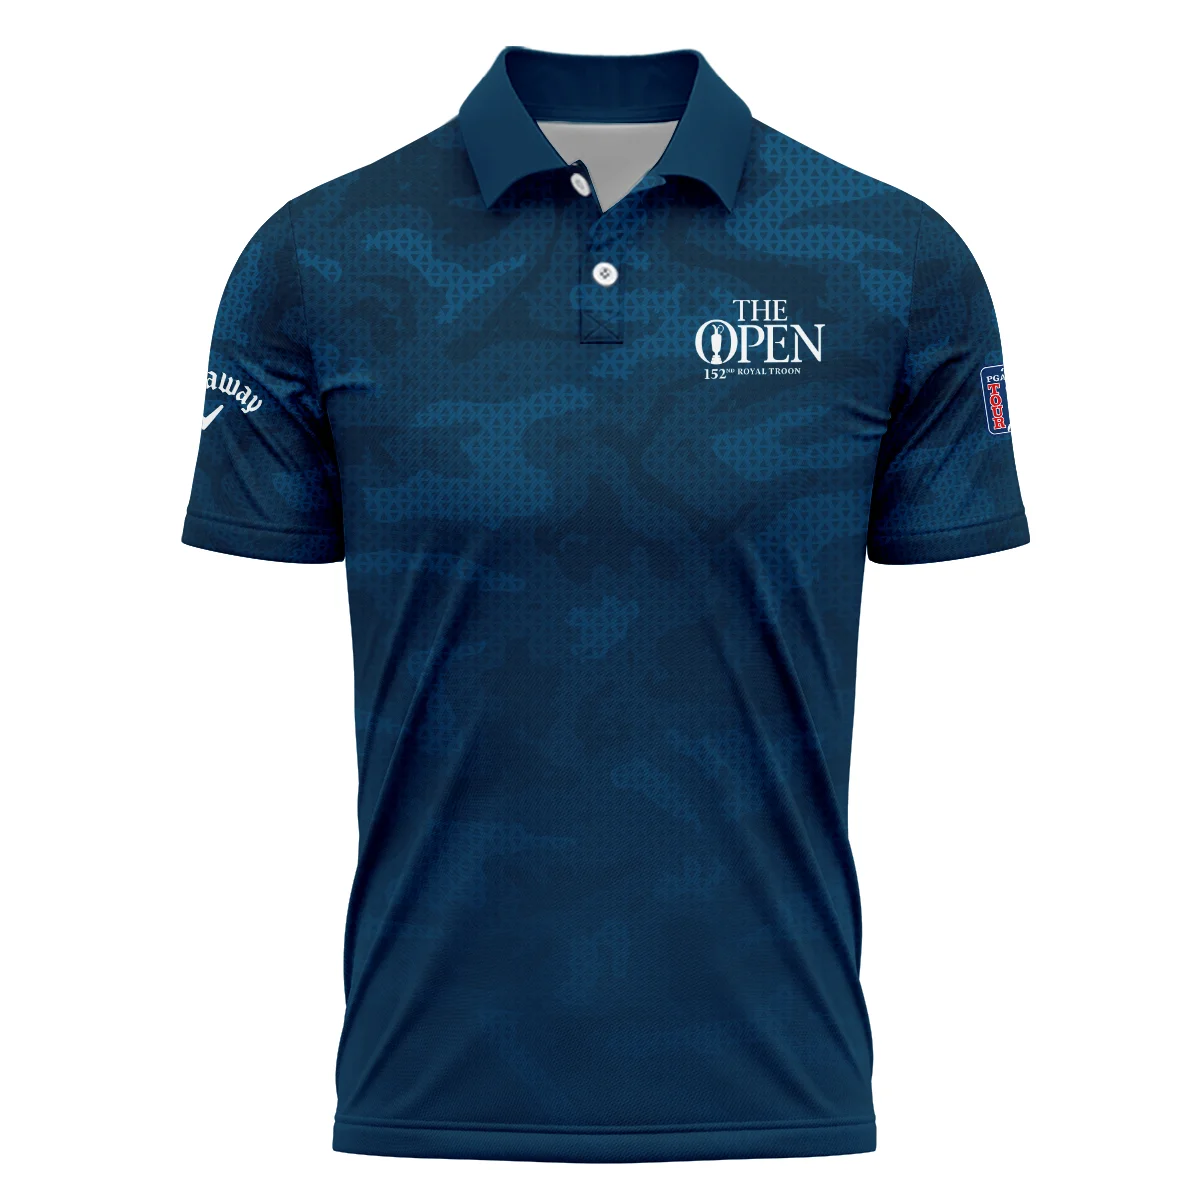 Callaway 152nd Open Championship Dark Blue Abstract Background Polo Shirt All Over Prints HOTOP260624A02CLWPL